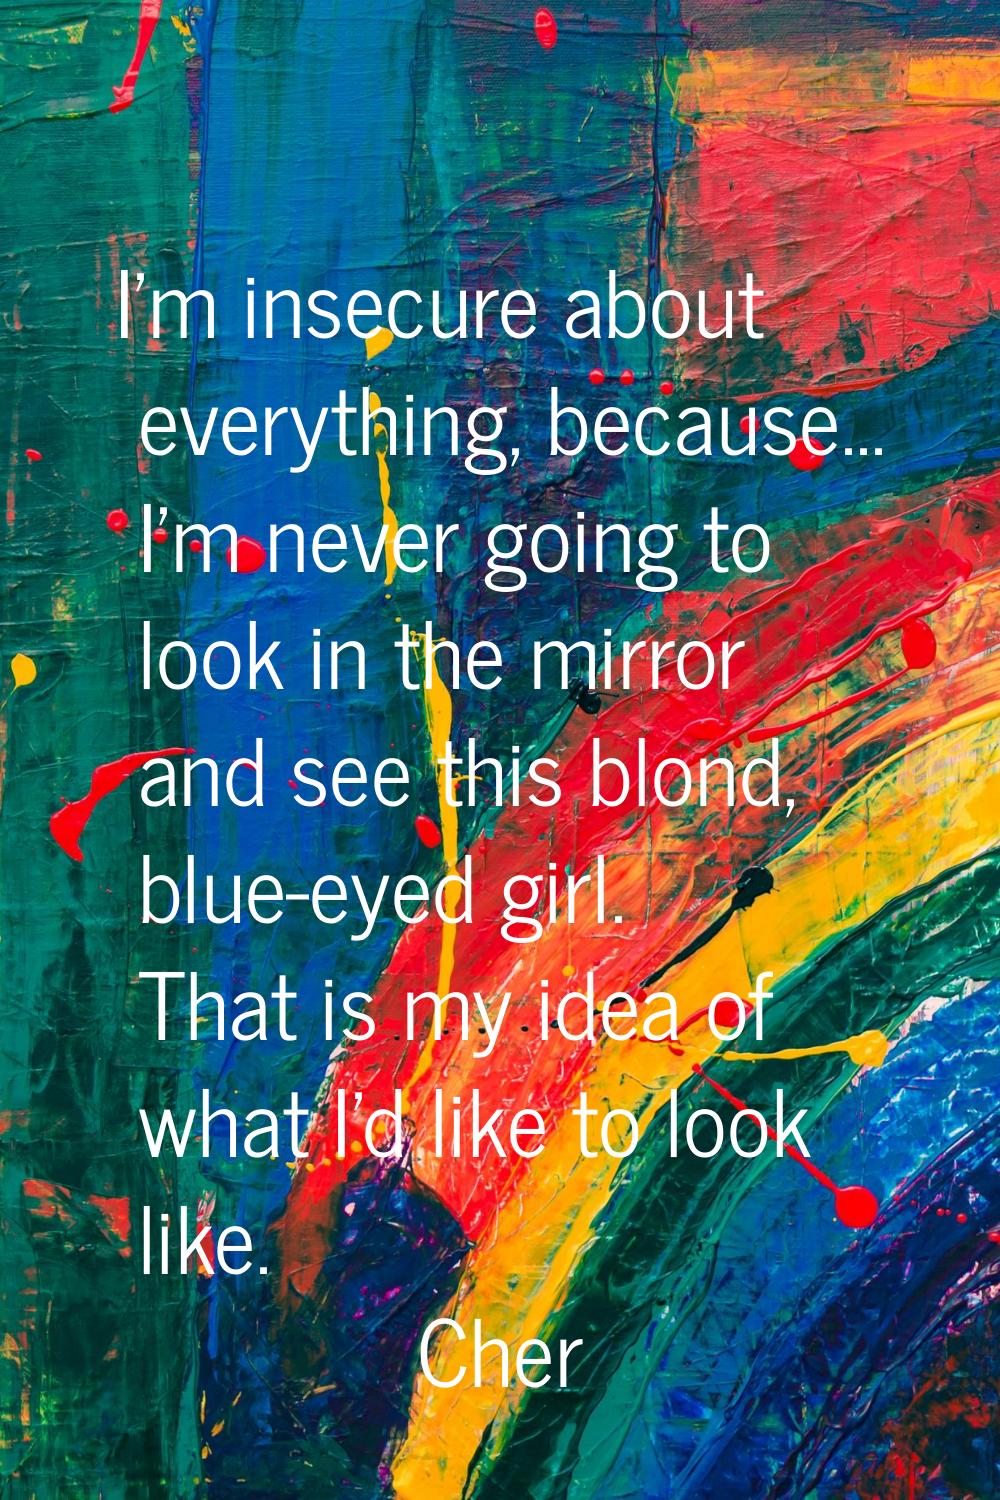 I'm insecure about everything, because... I'm never going to look in the mirror and see this blond,